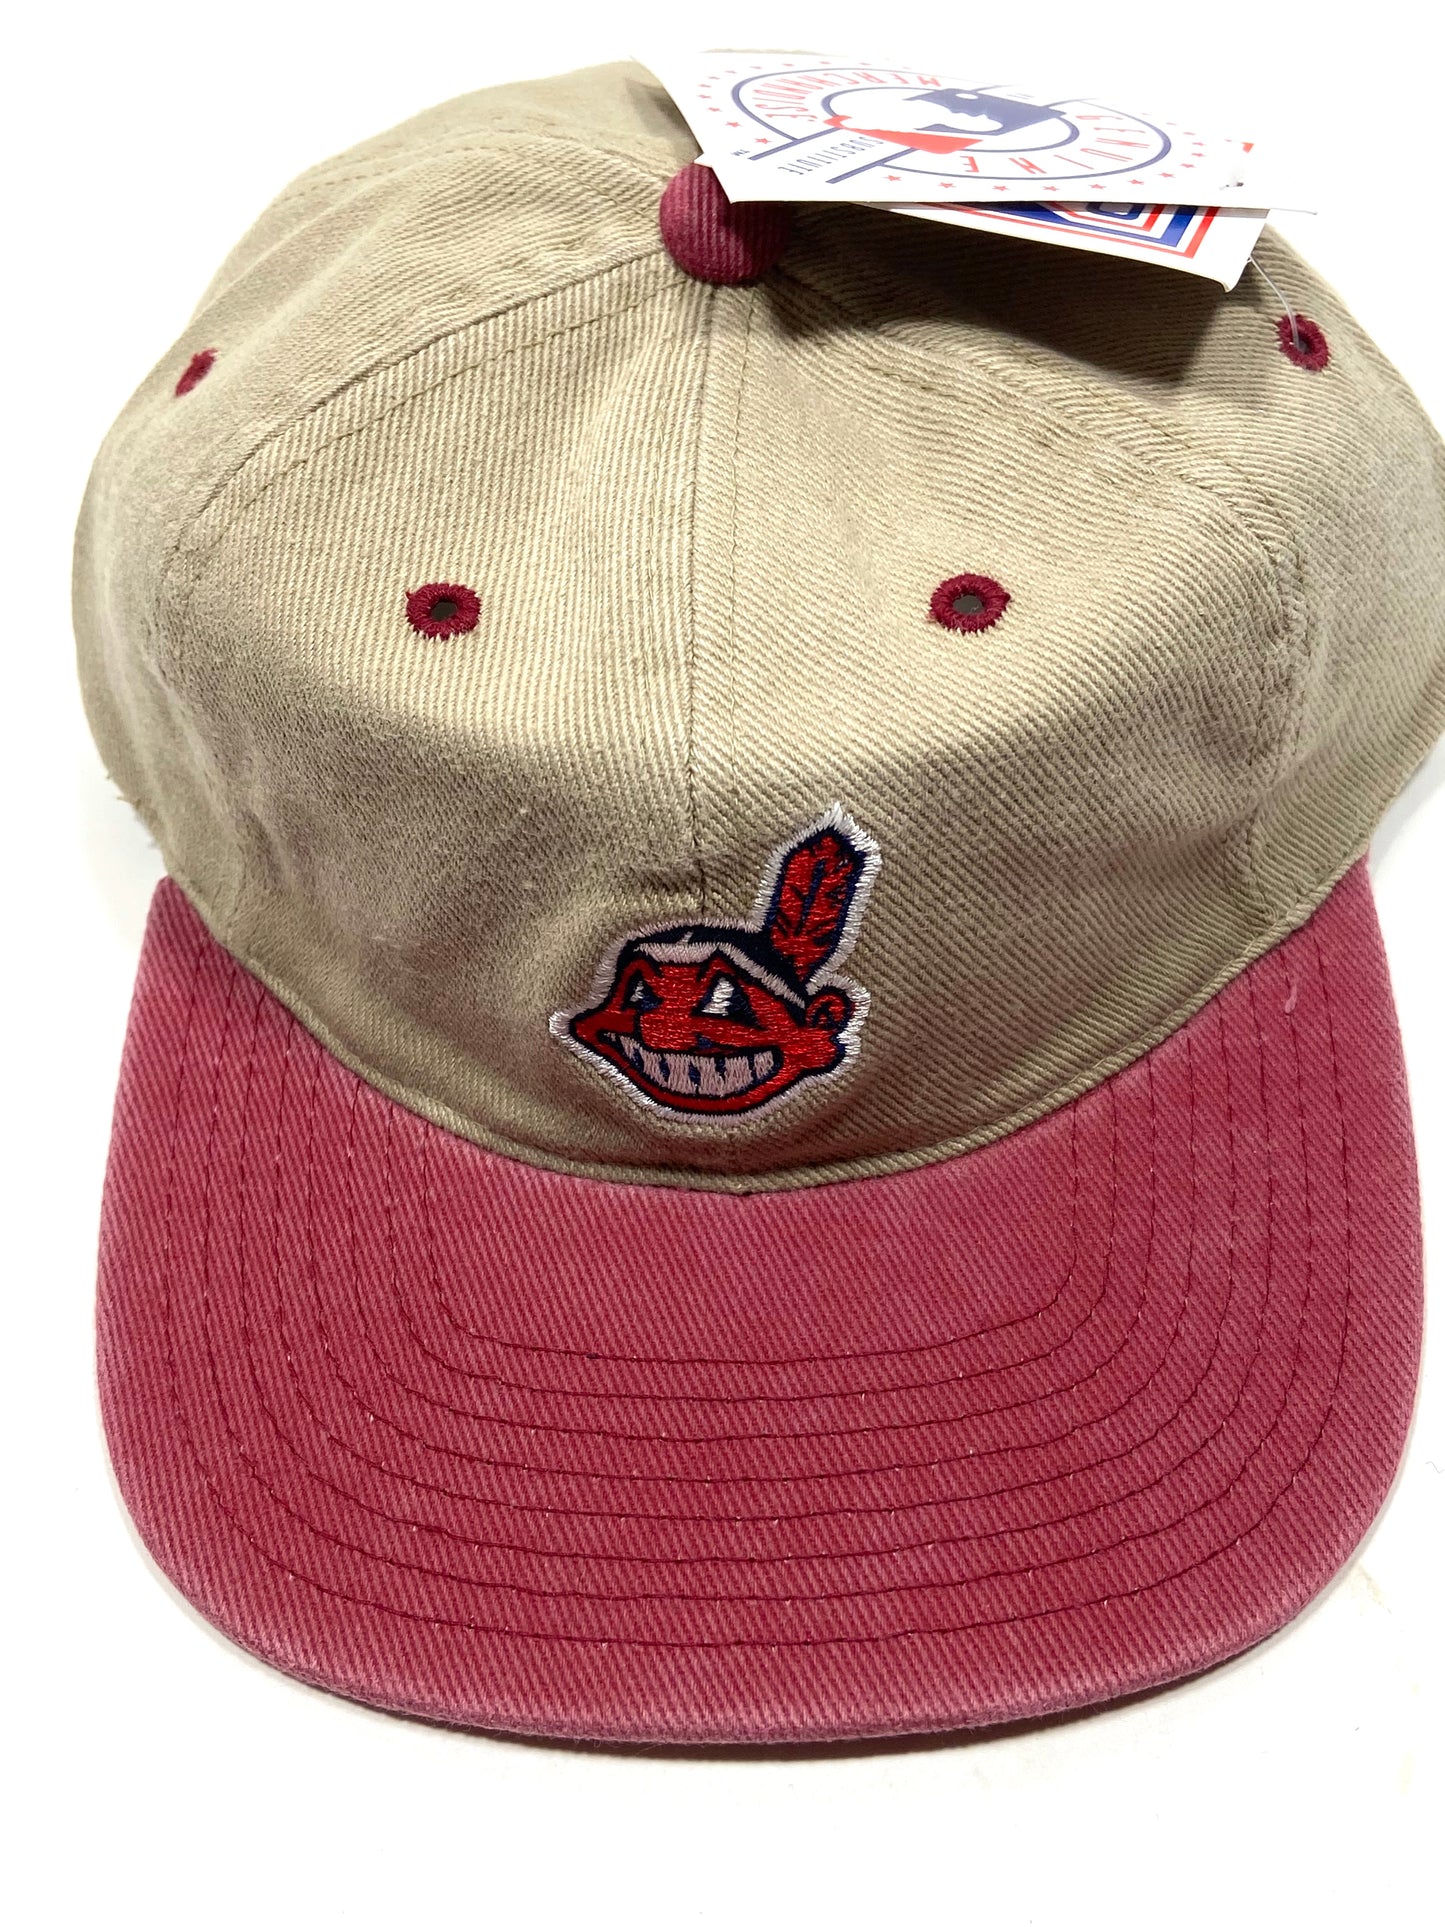 Cleveland Indians Vintage MLB Cotton Wahoo Hat by Logo 7